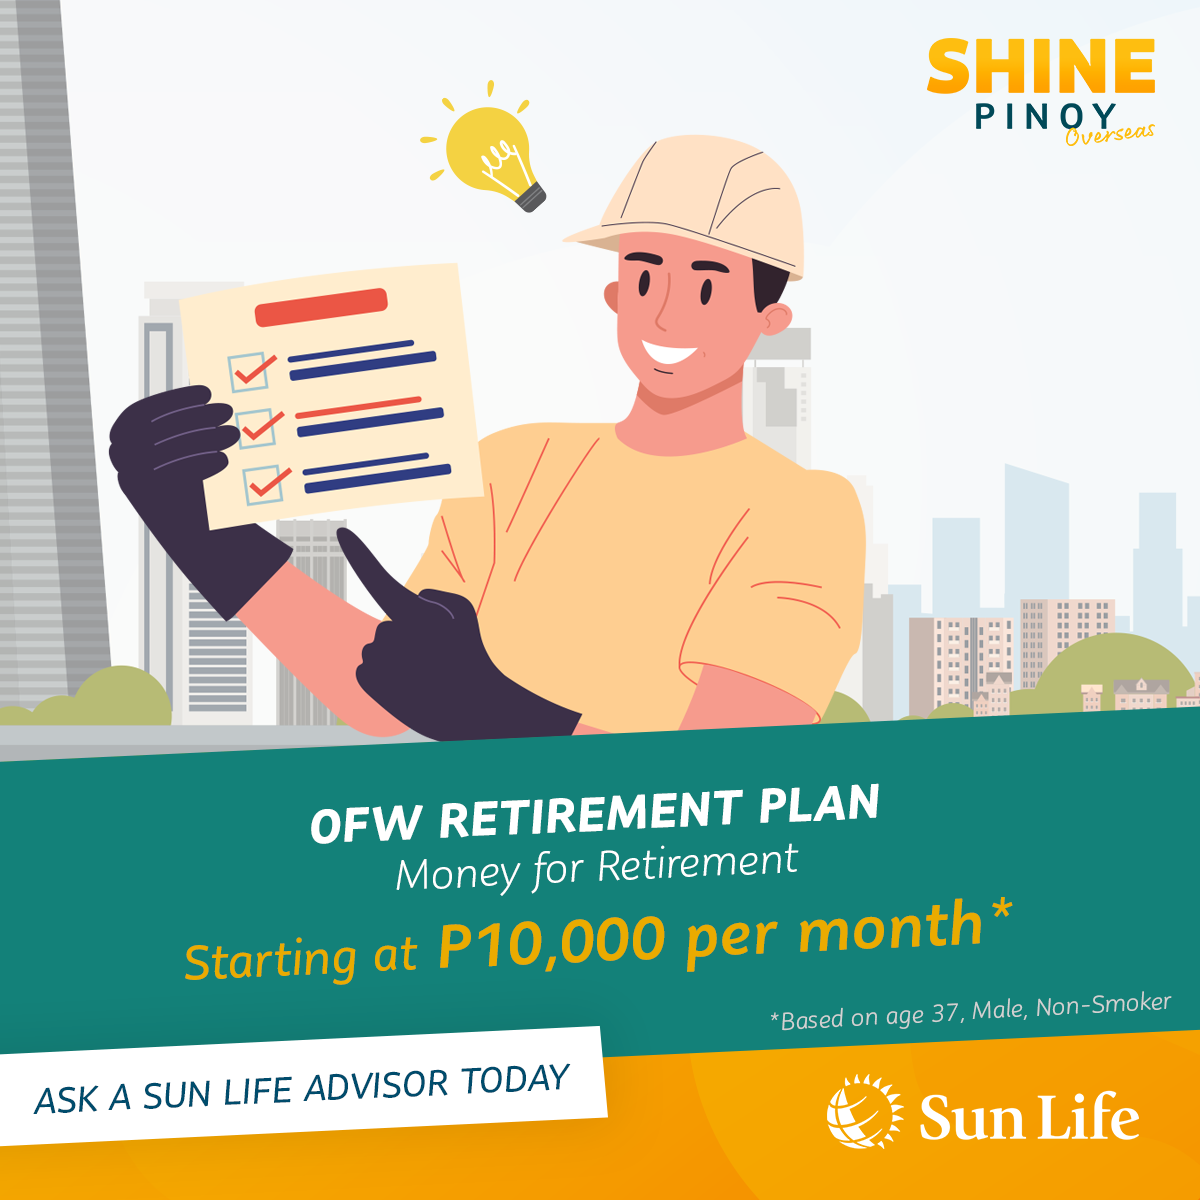 OFW Retirement Plan | Shine Pinoy Insurance for OFW